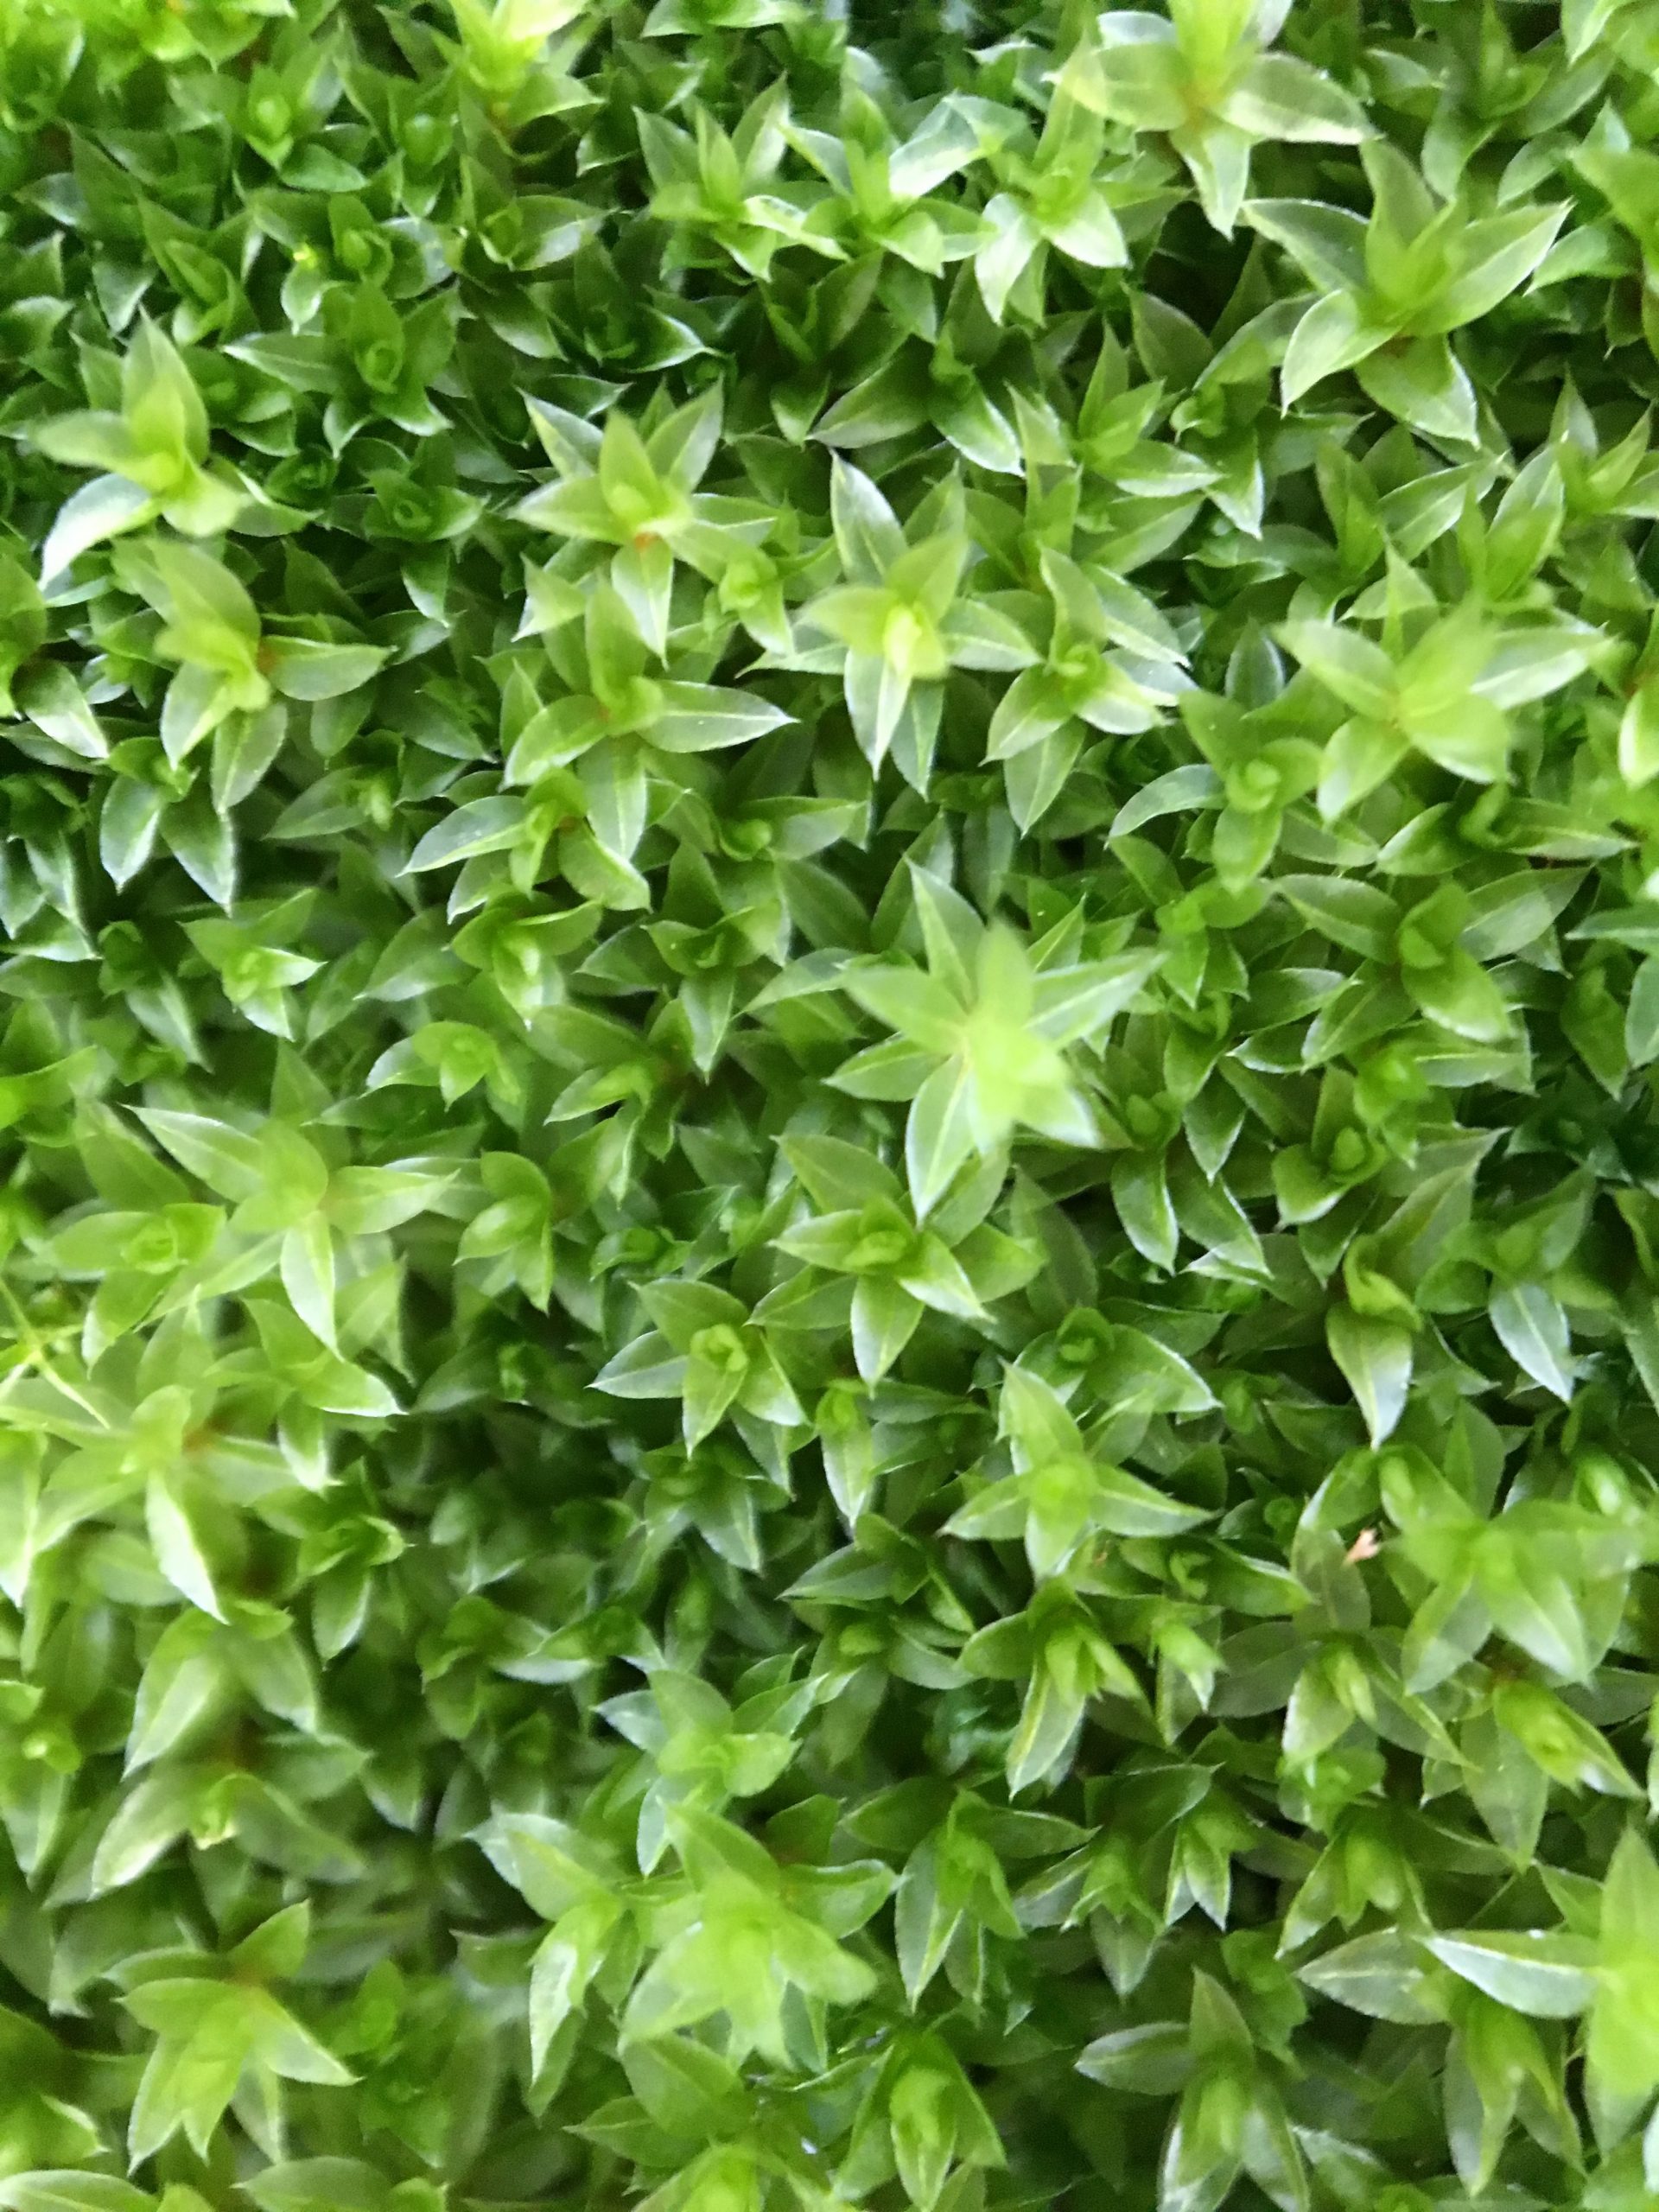 Leaves of a gametophyte plant, which are bright green and triangular and grow in clusters on a bush